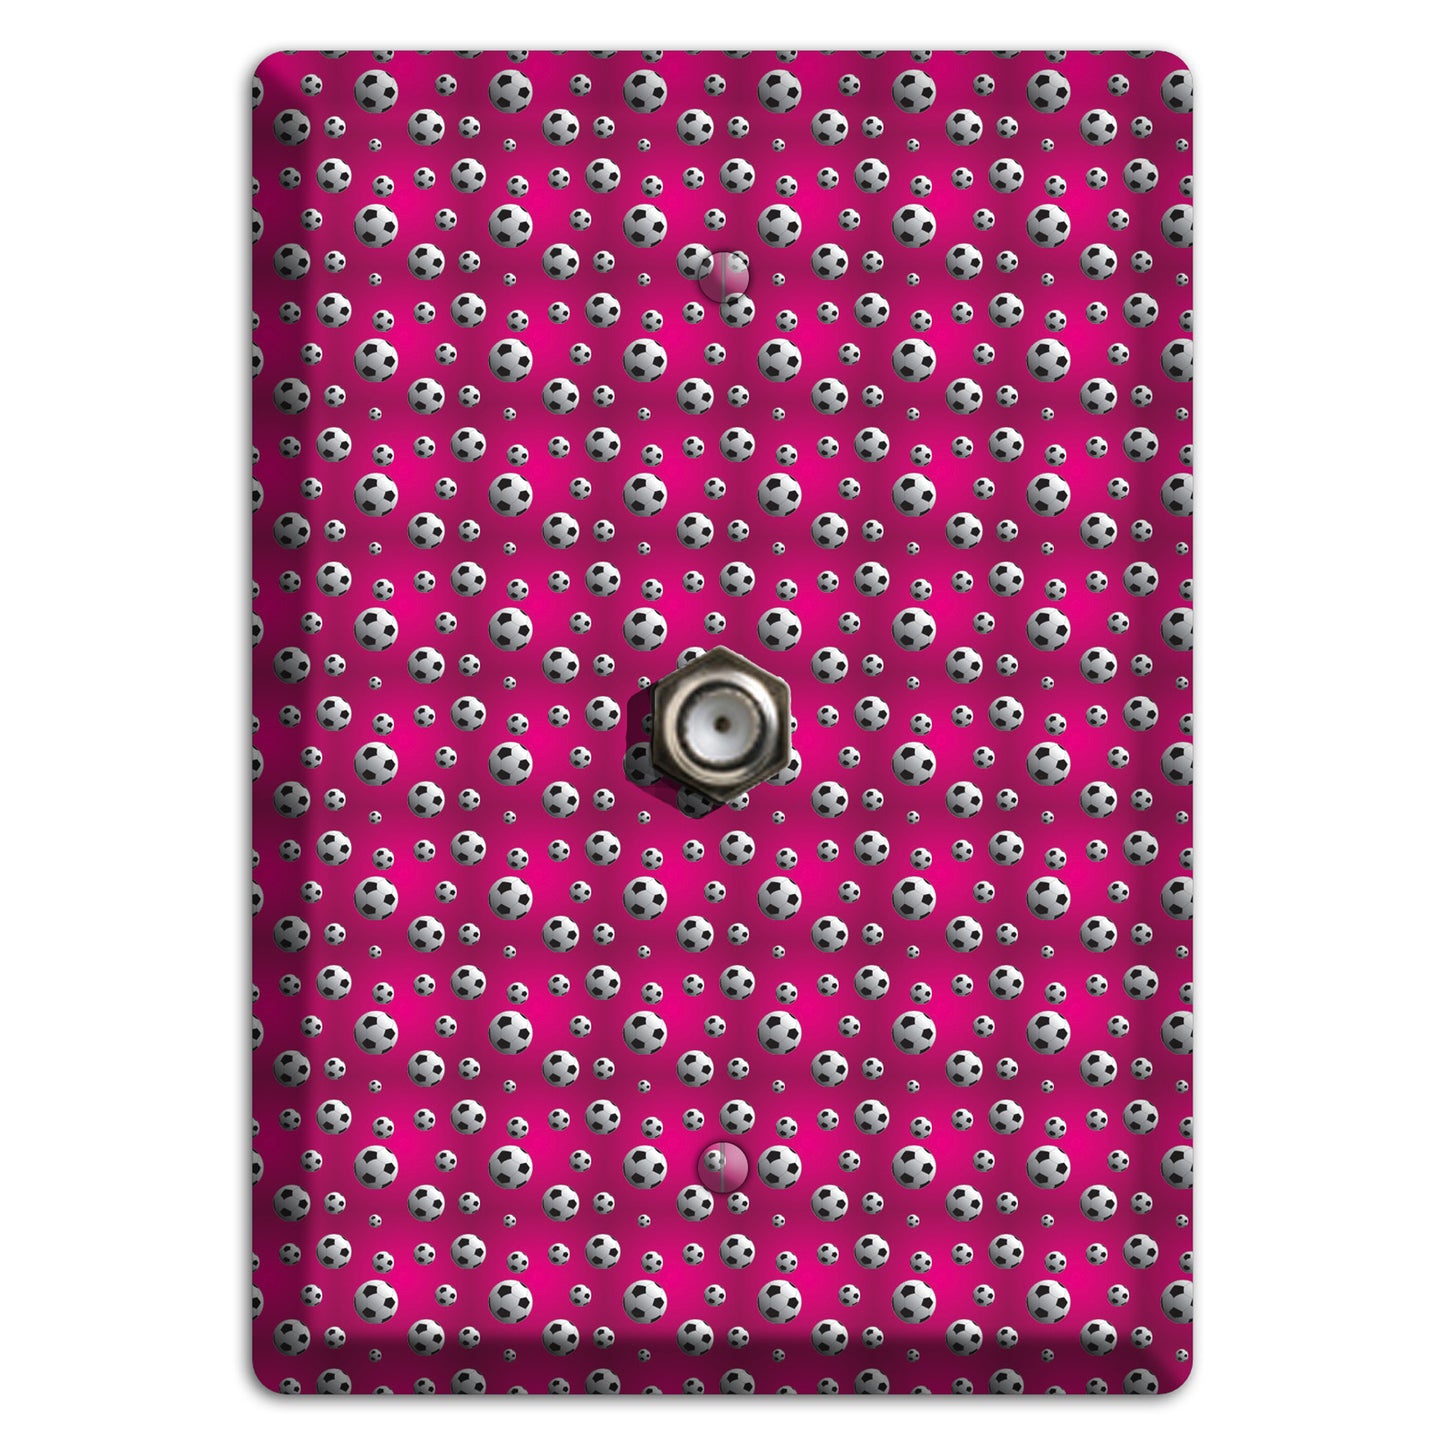 Fuschia with Soccer Balls Cable Wallplate